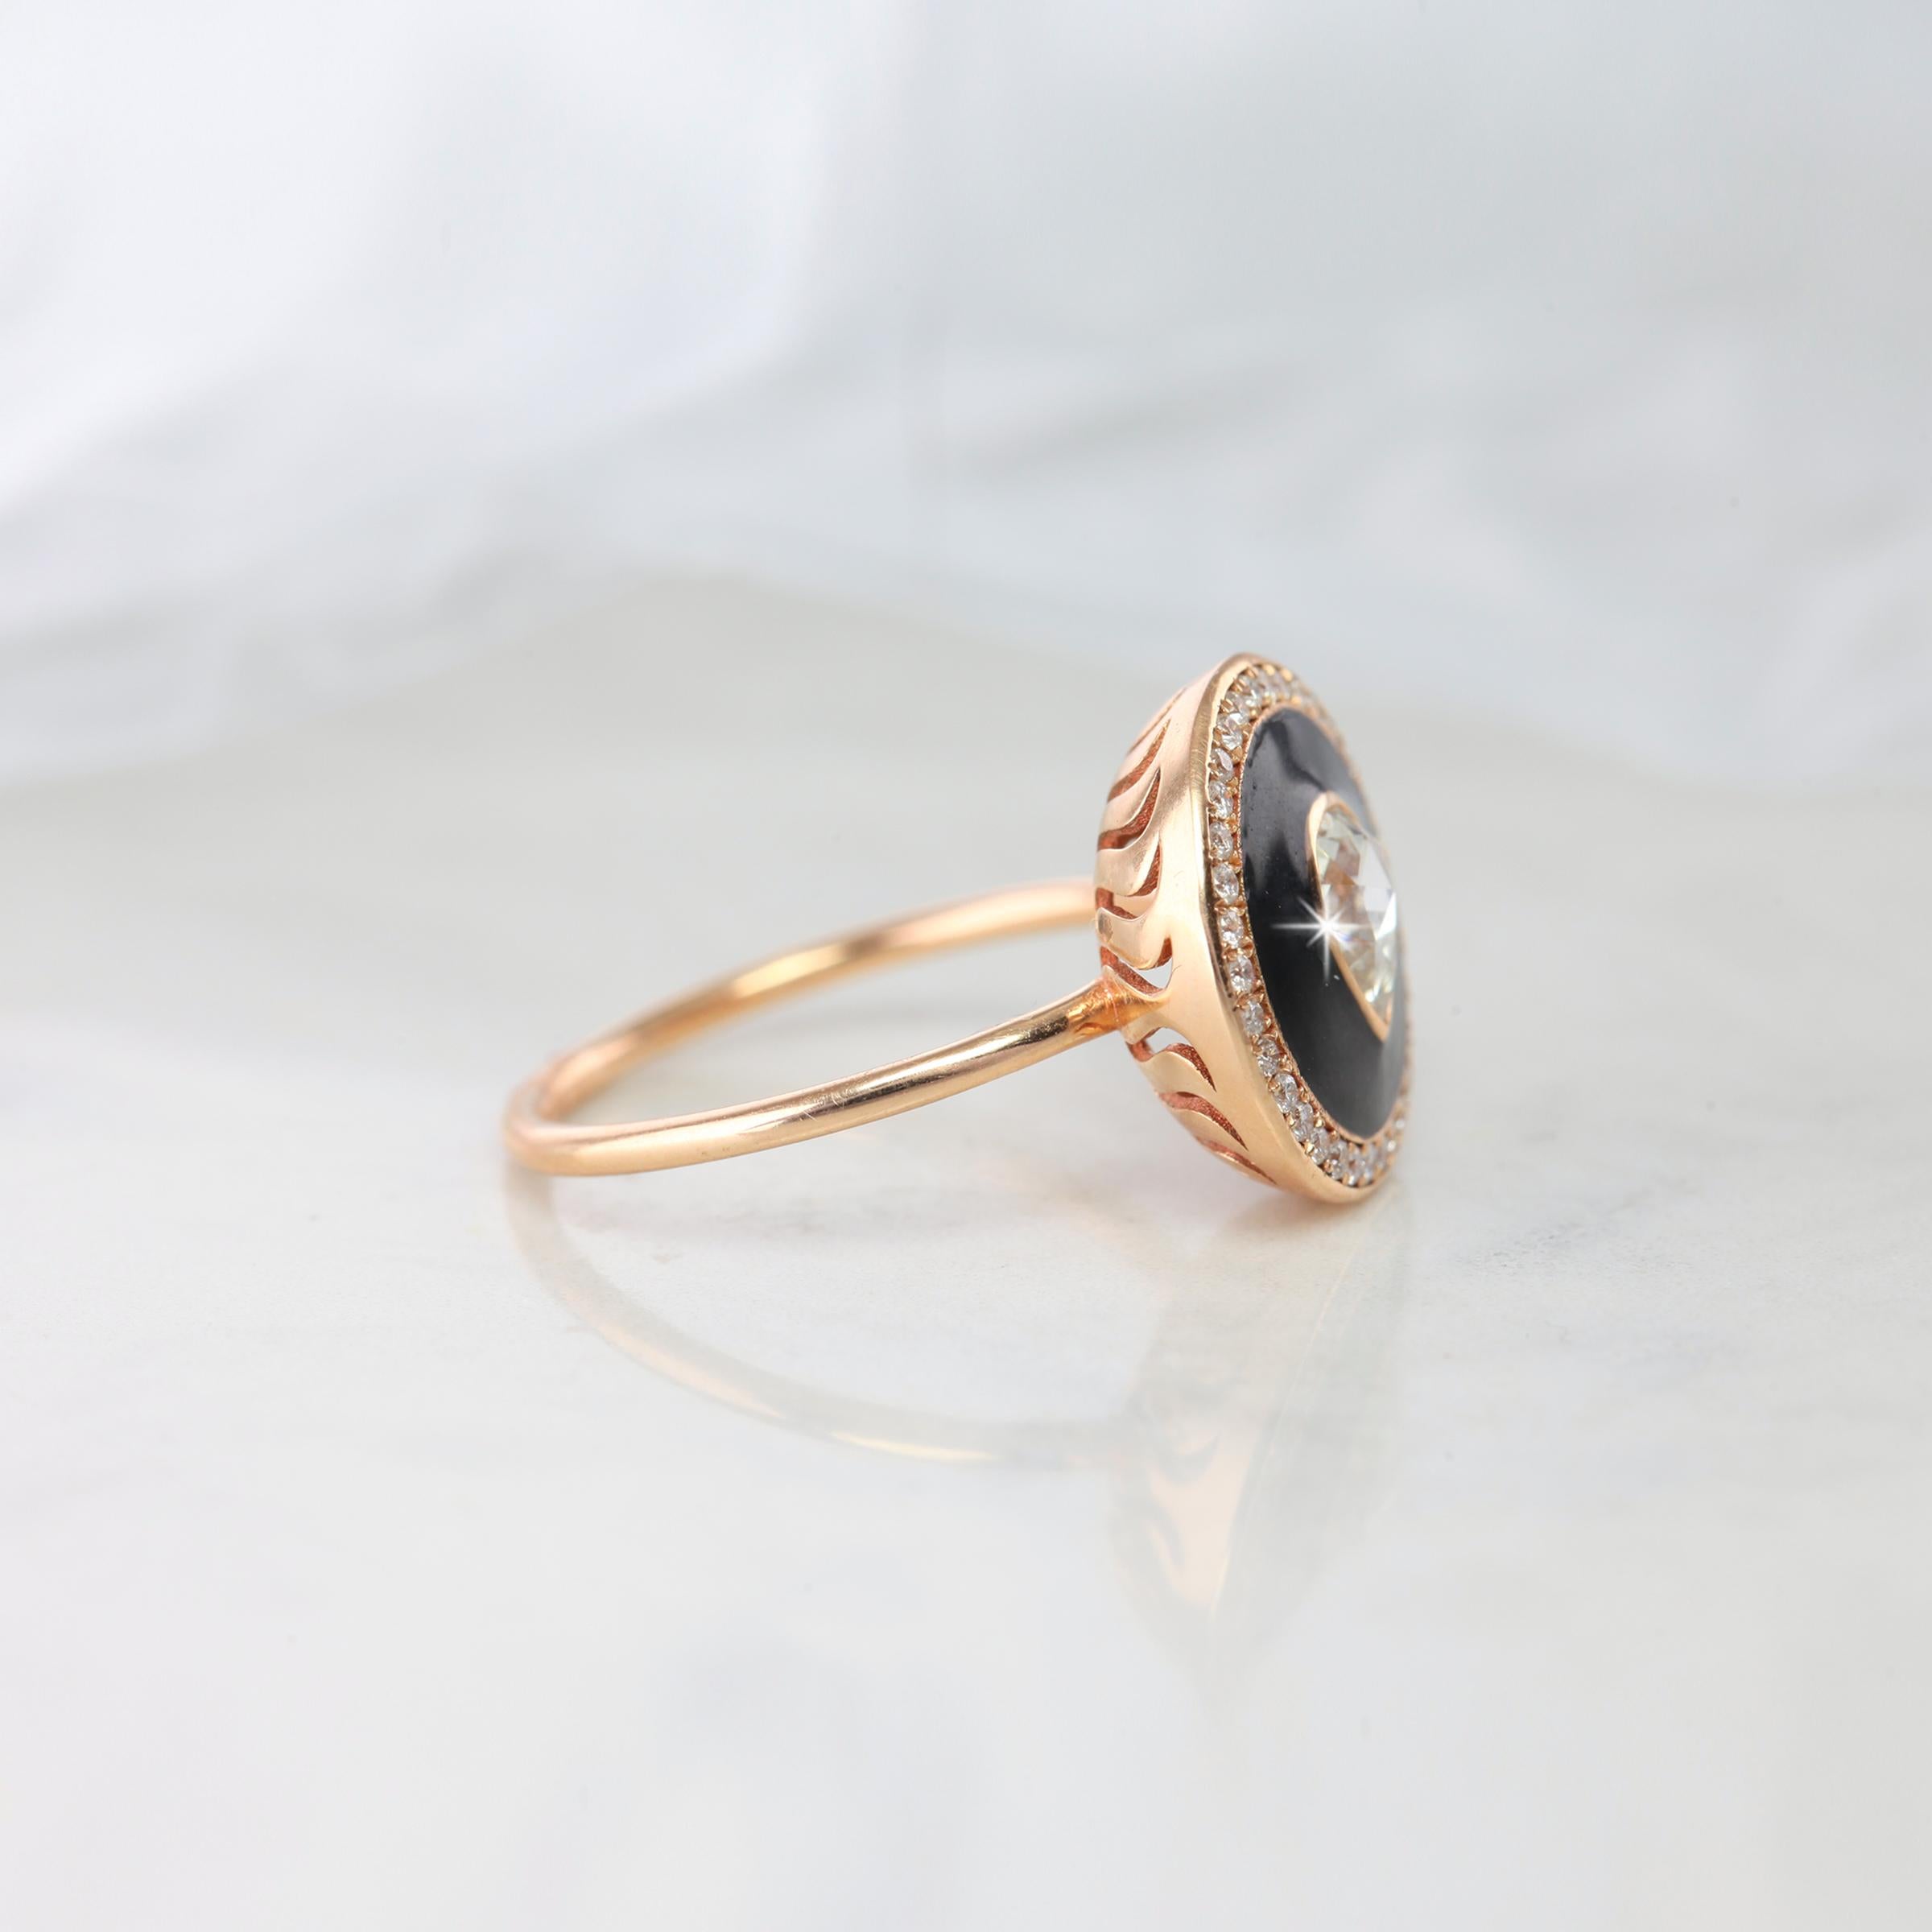 Art Deco Pear Cut Rosecut Diamond Ring, Artdeco Pear Shape Rosecut Black Enameled Rose Gold Ring With Pave Setting Engagement Statement Ring created by hands from ring to the stone shapes.
I used brillant black enameled with pave setting to reveal